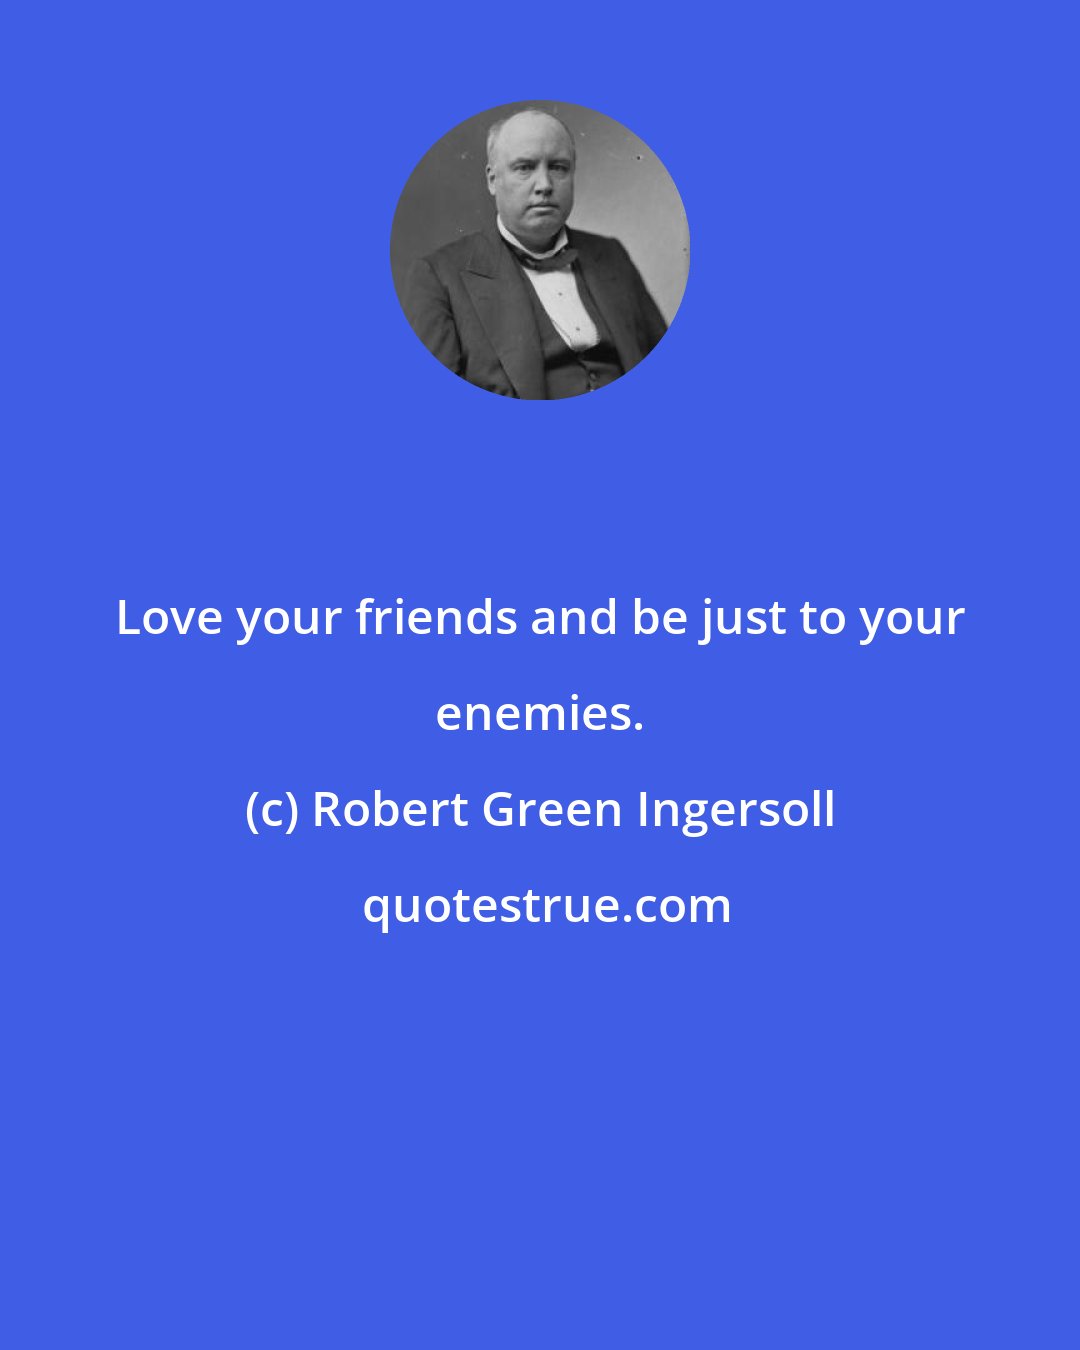 Robert Green Ingersoll: Love your friends and be just to your enemies.